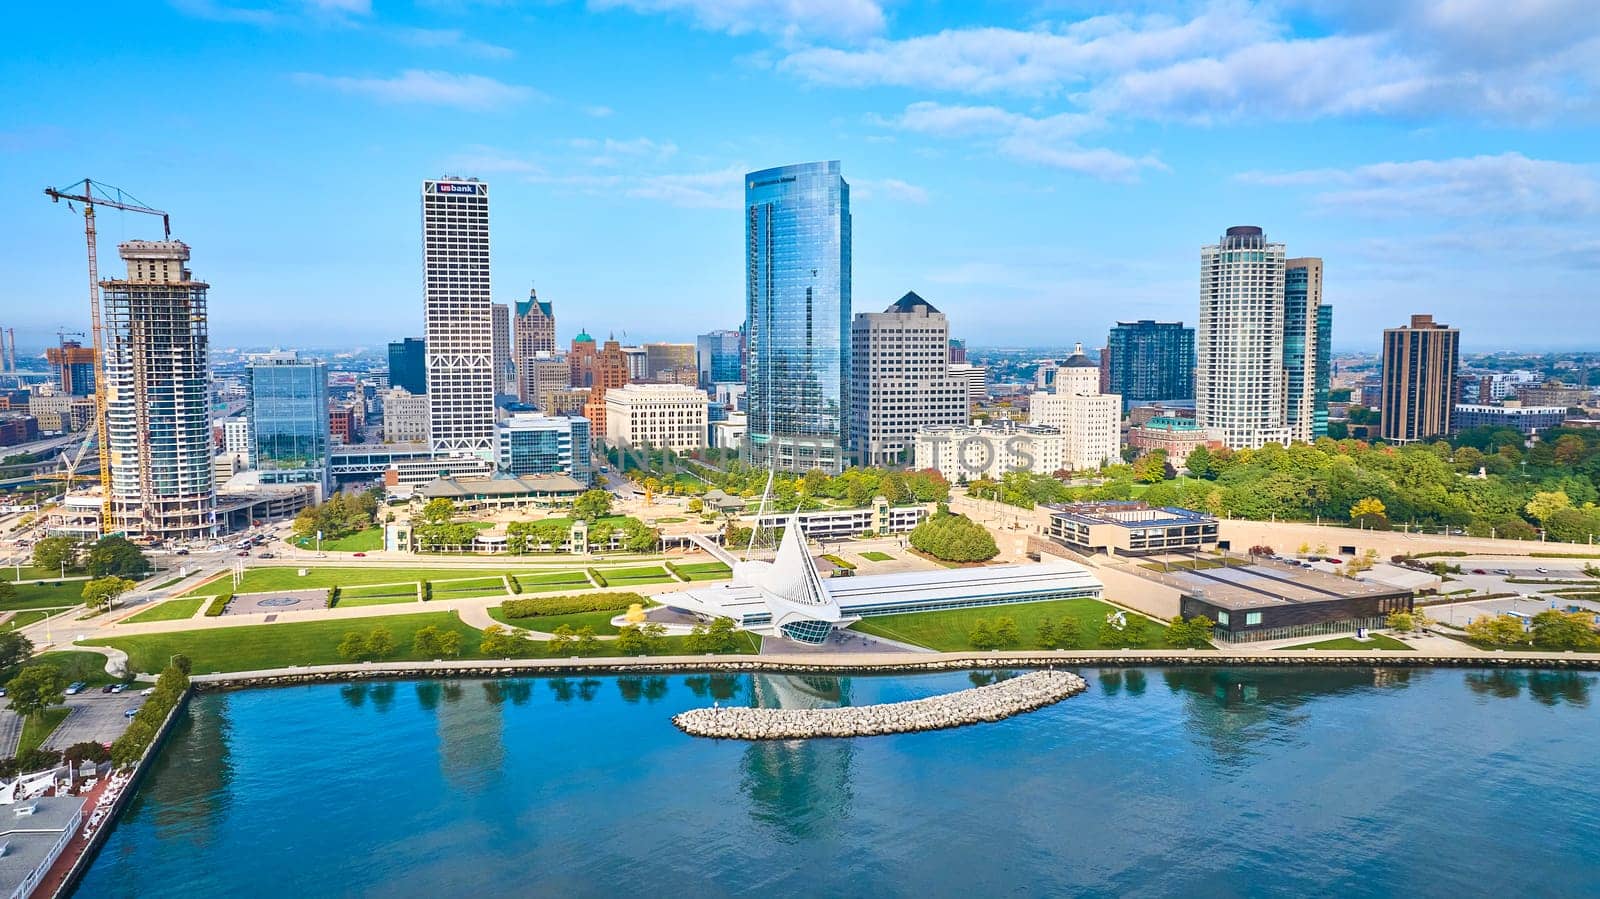 Aerial View of Milwaukee Skyline, Lakefront Park, and Construction by njproductions